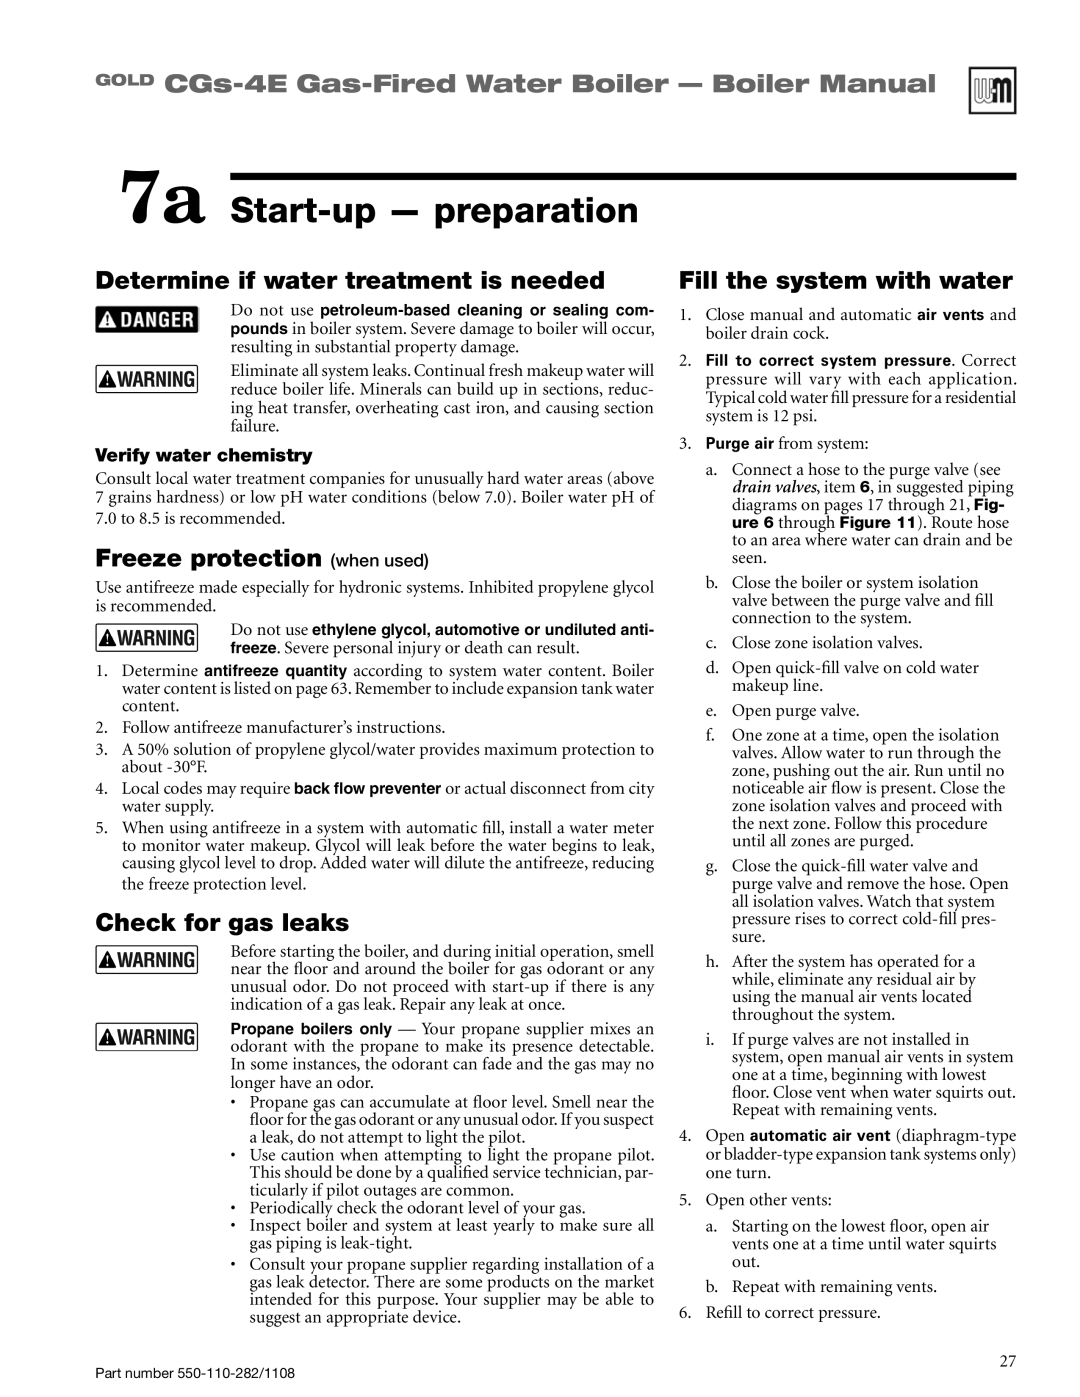 Weil-McLain CGS-4E manual 7a Start-up- preparation, Determine if water treatment is needed, Freeze protection when used 